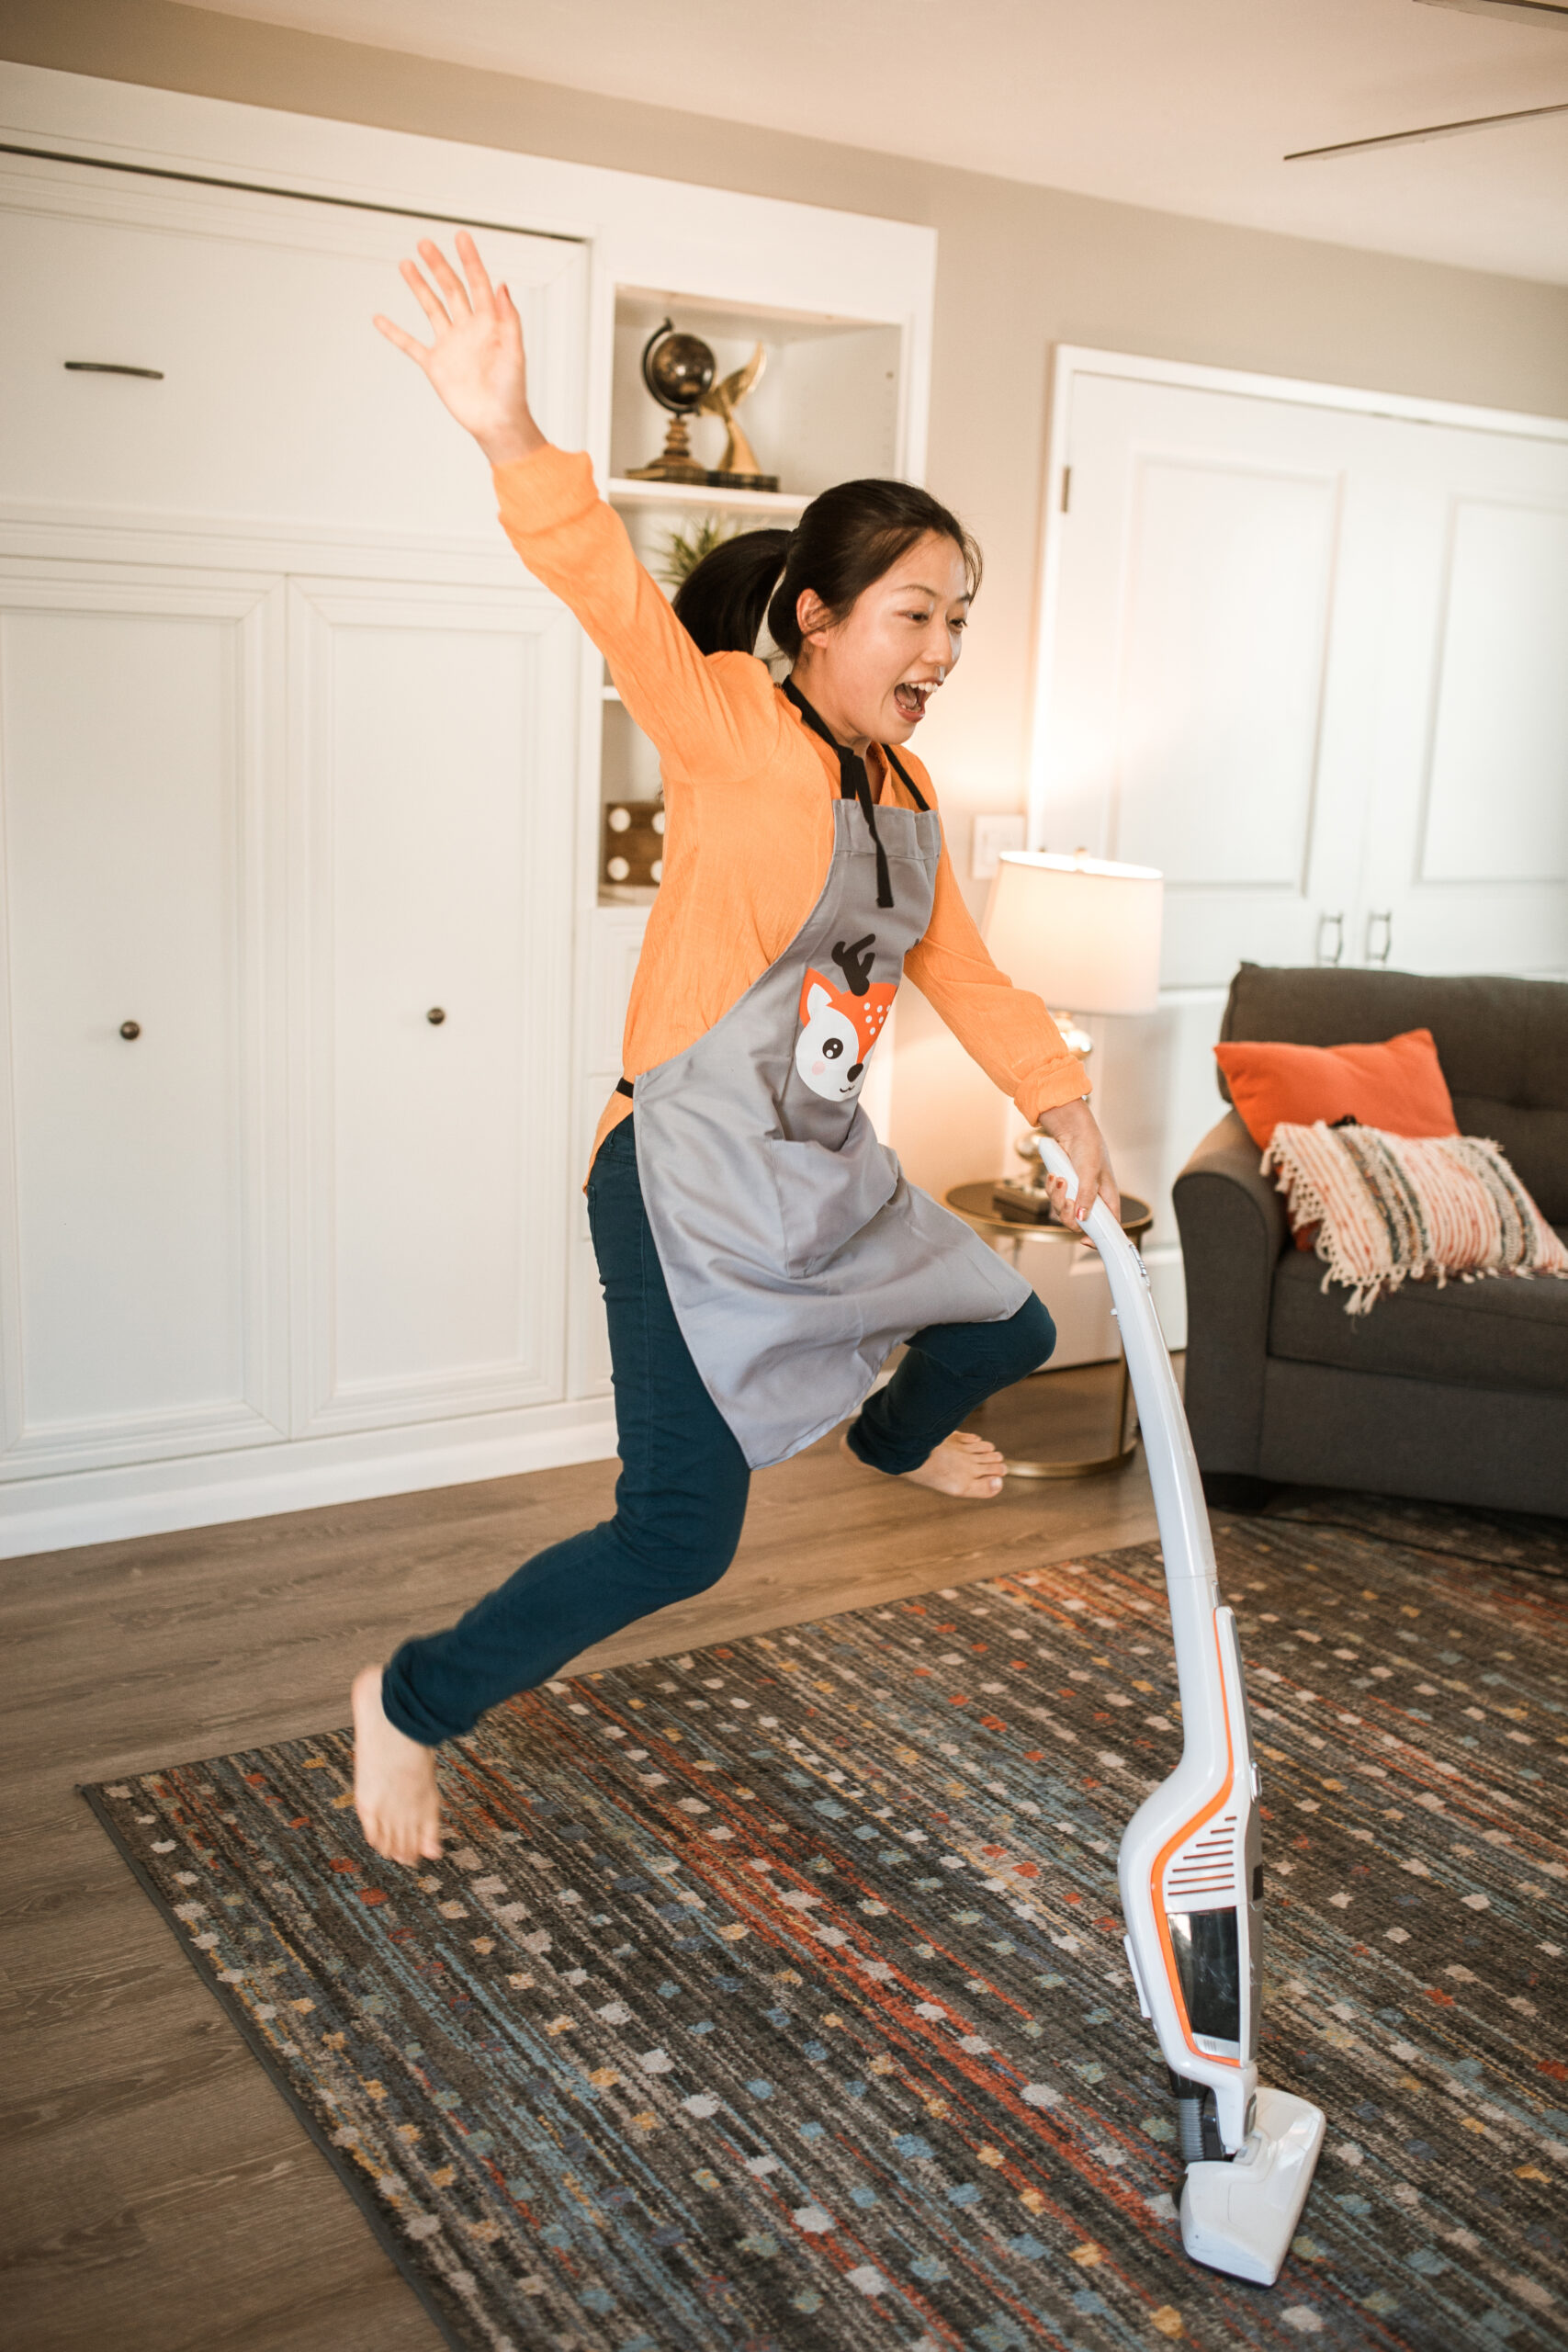 A woman jumping while using a vacuum cleaner